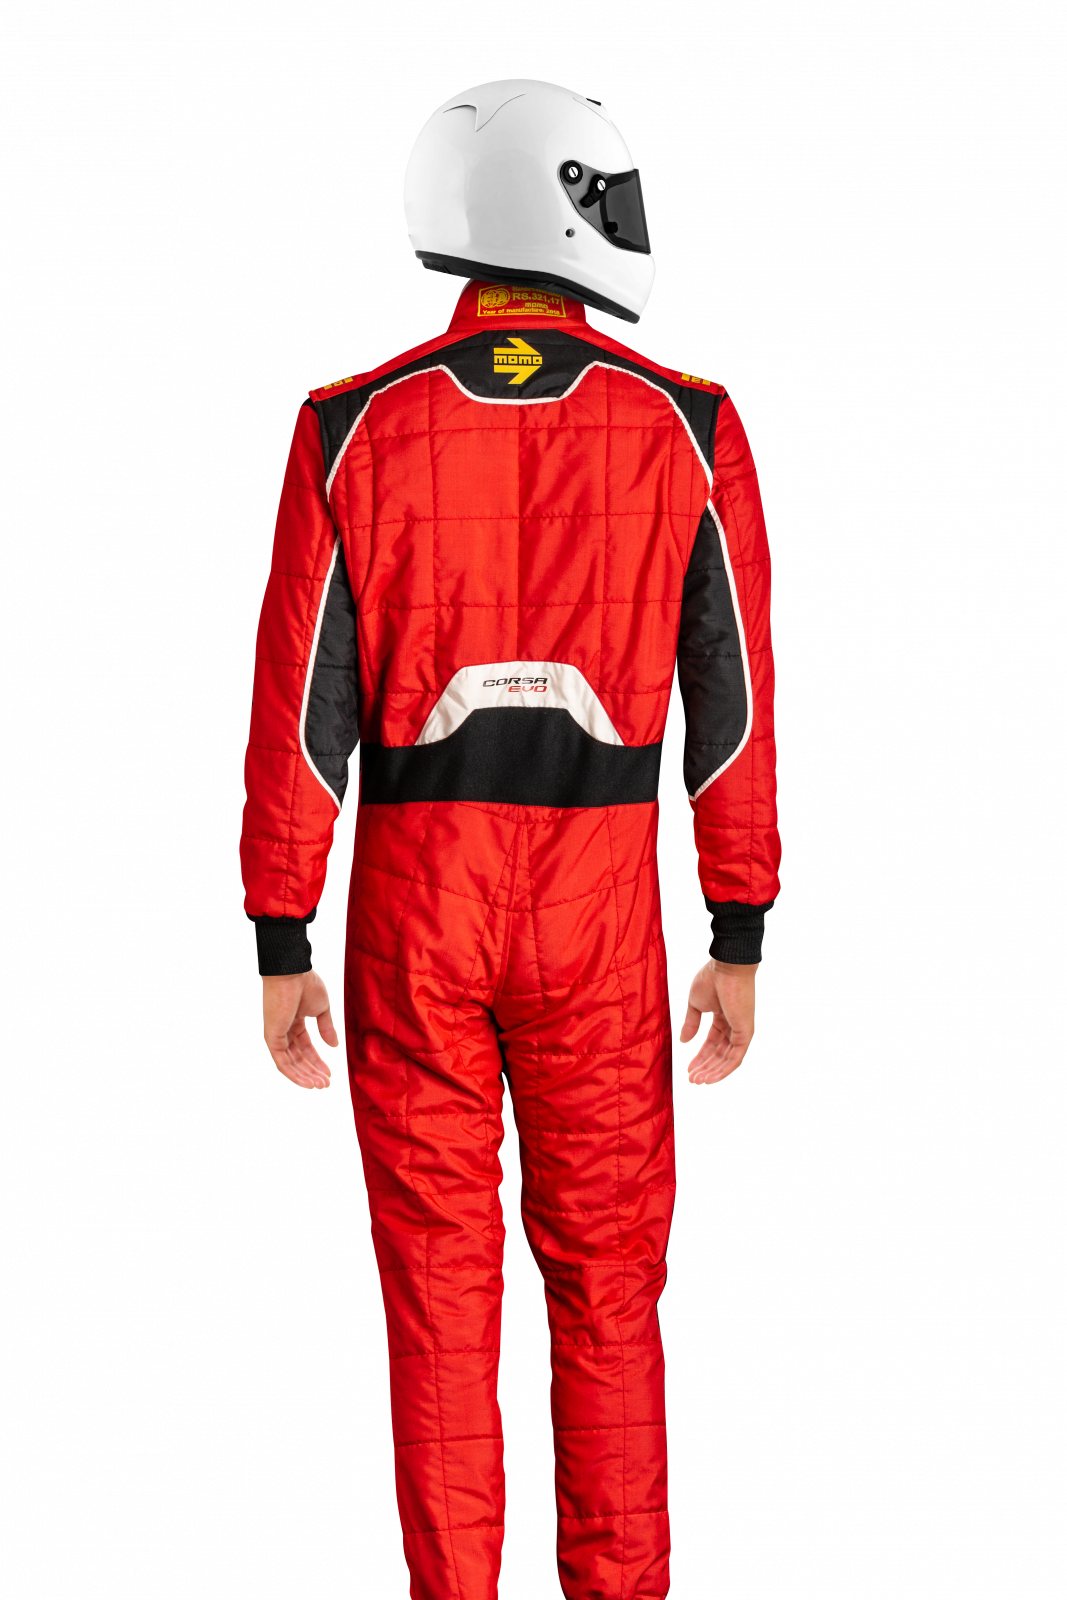 MOMO Corsa Evo Red Size 64 Racing Suit TUCOEVORED64